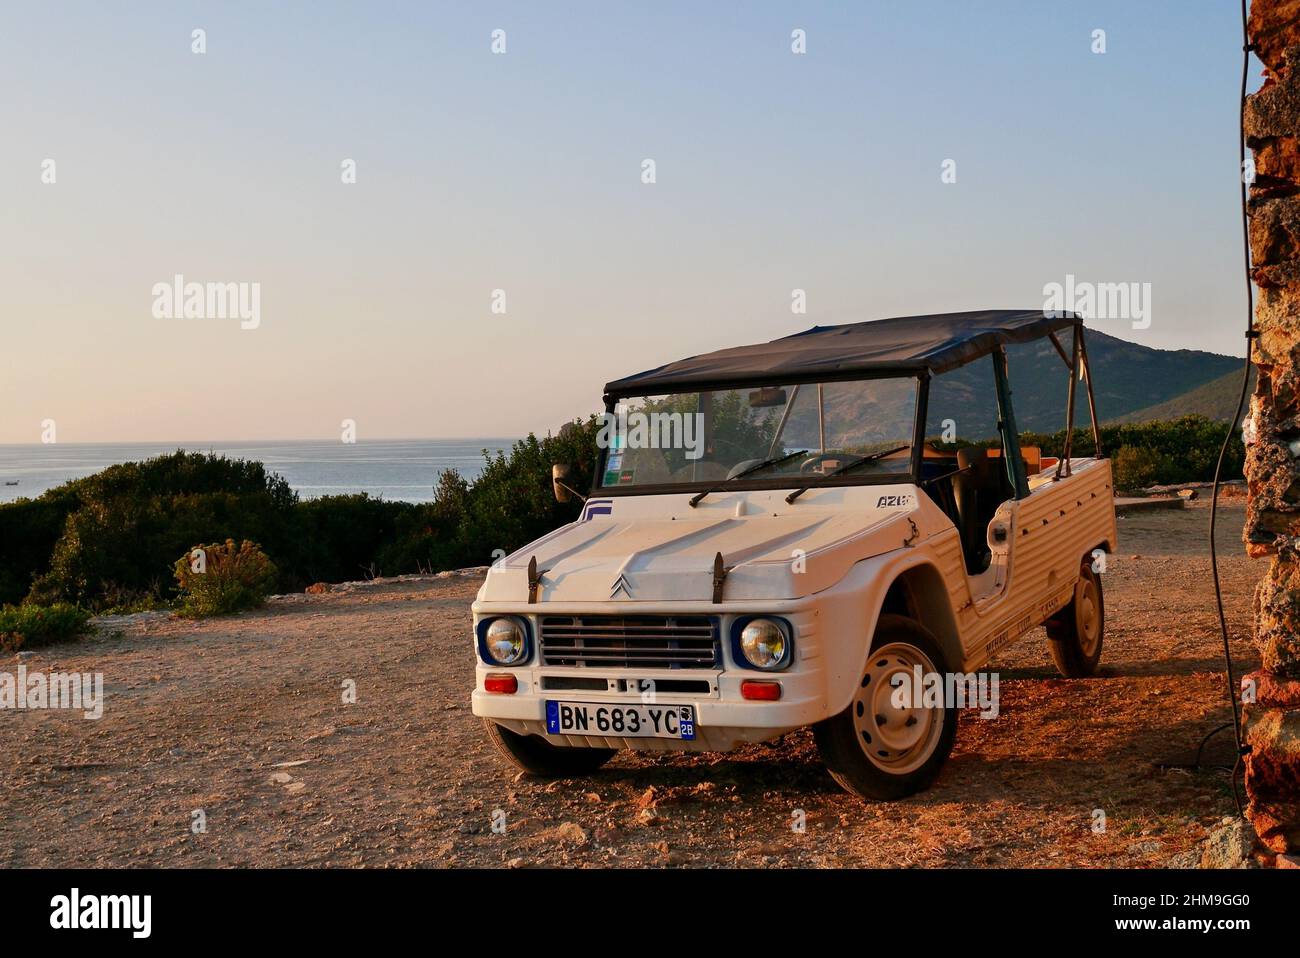 Galeria, Corsica, 20.07.2019. Vintage car in the hills of Galeria overlooking the Mediterranean Sea. Corsica, France. High quality photo Stock Photo